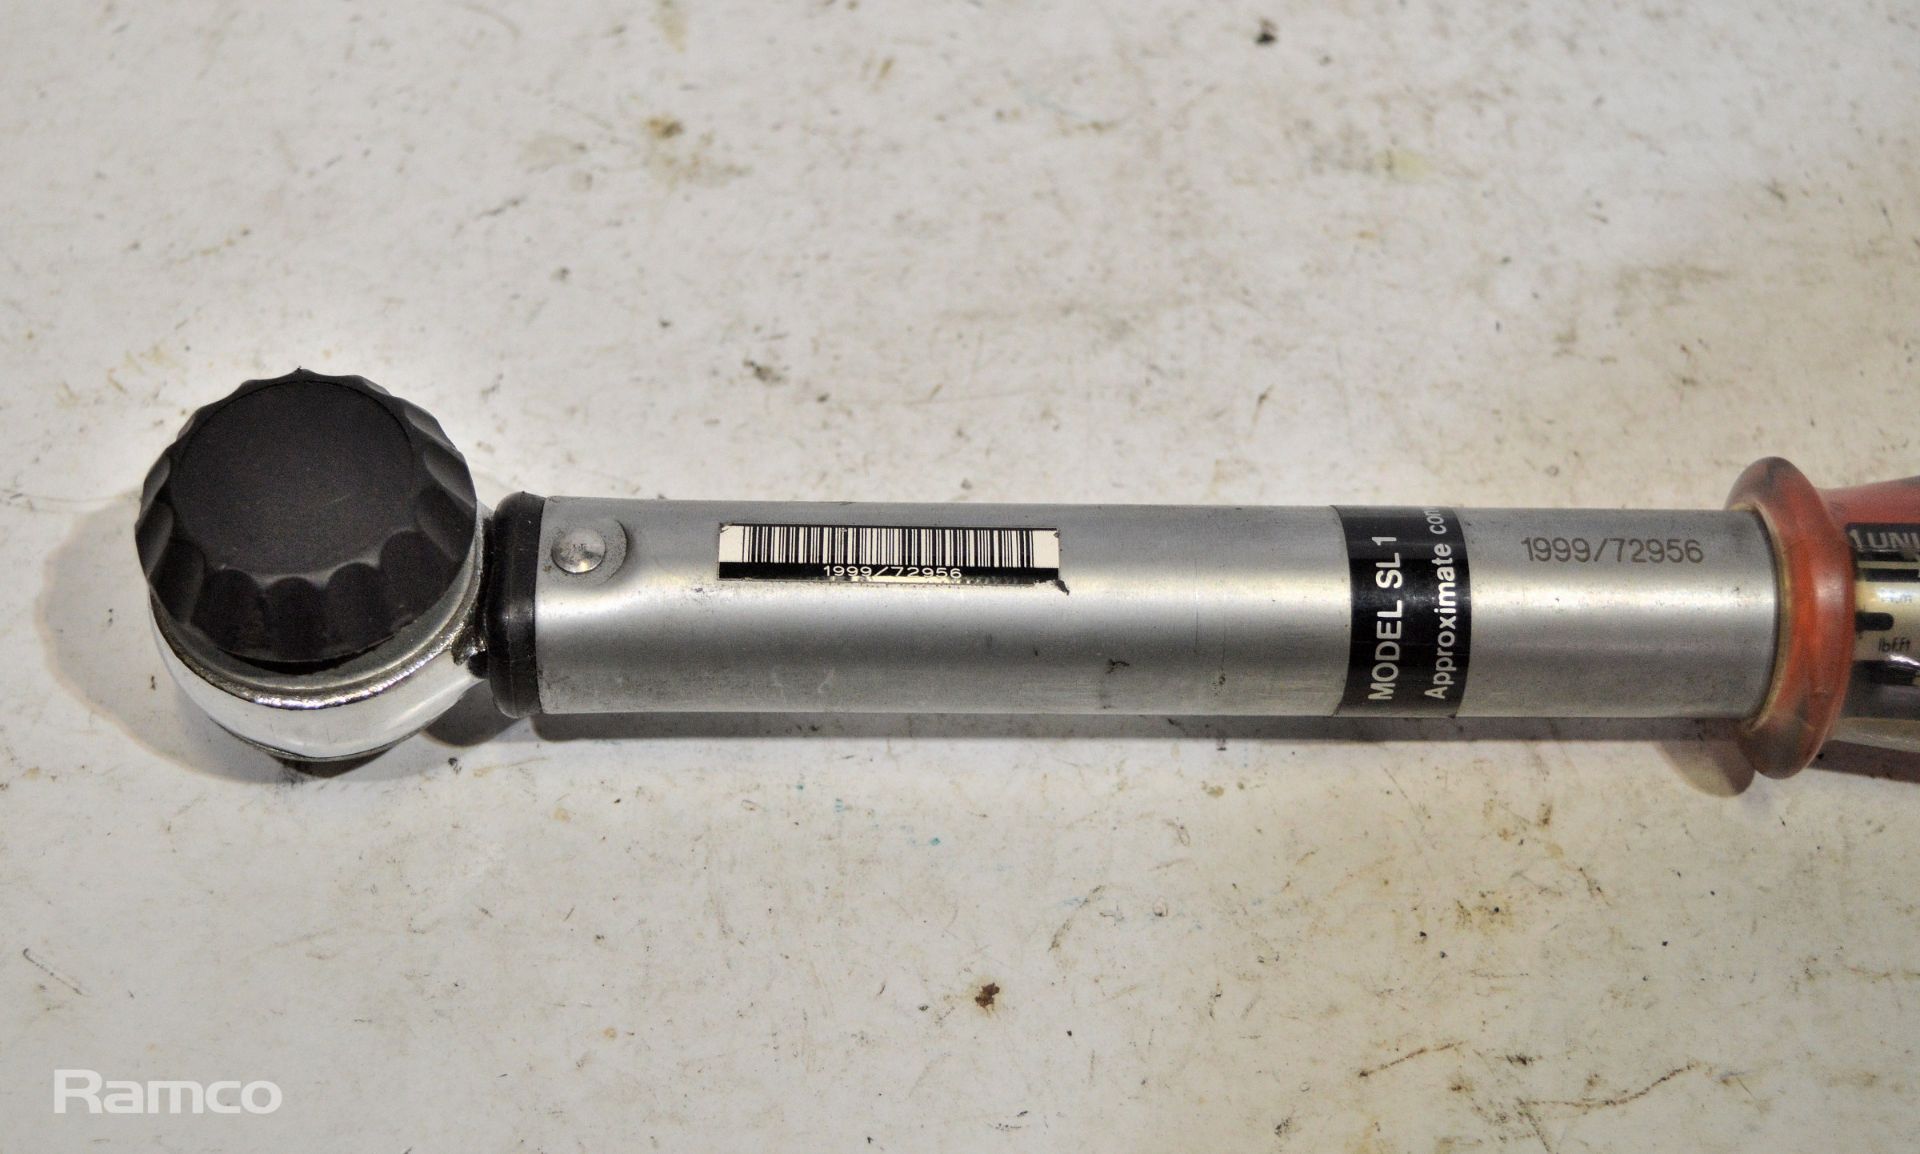 Norbar torque wrench 5-40 Lbf.ft - Image 2 of 4